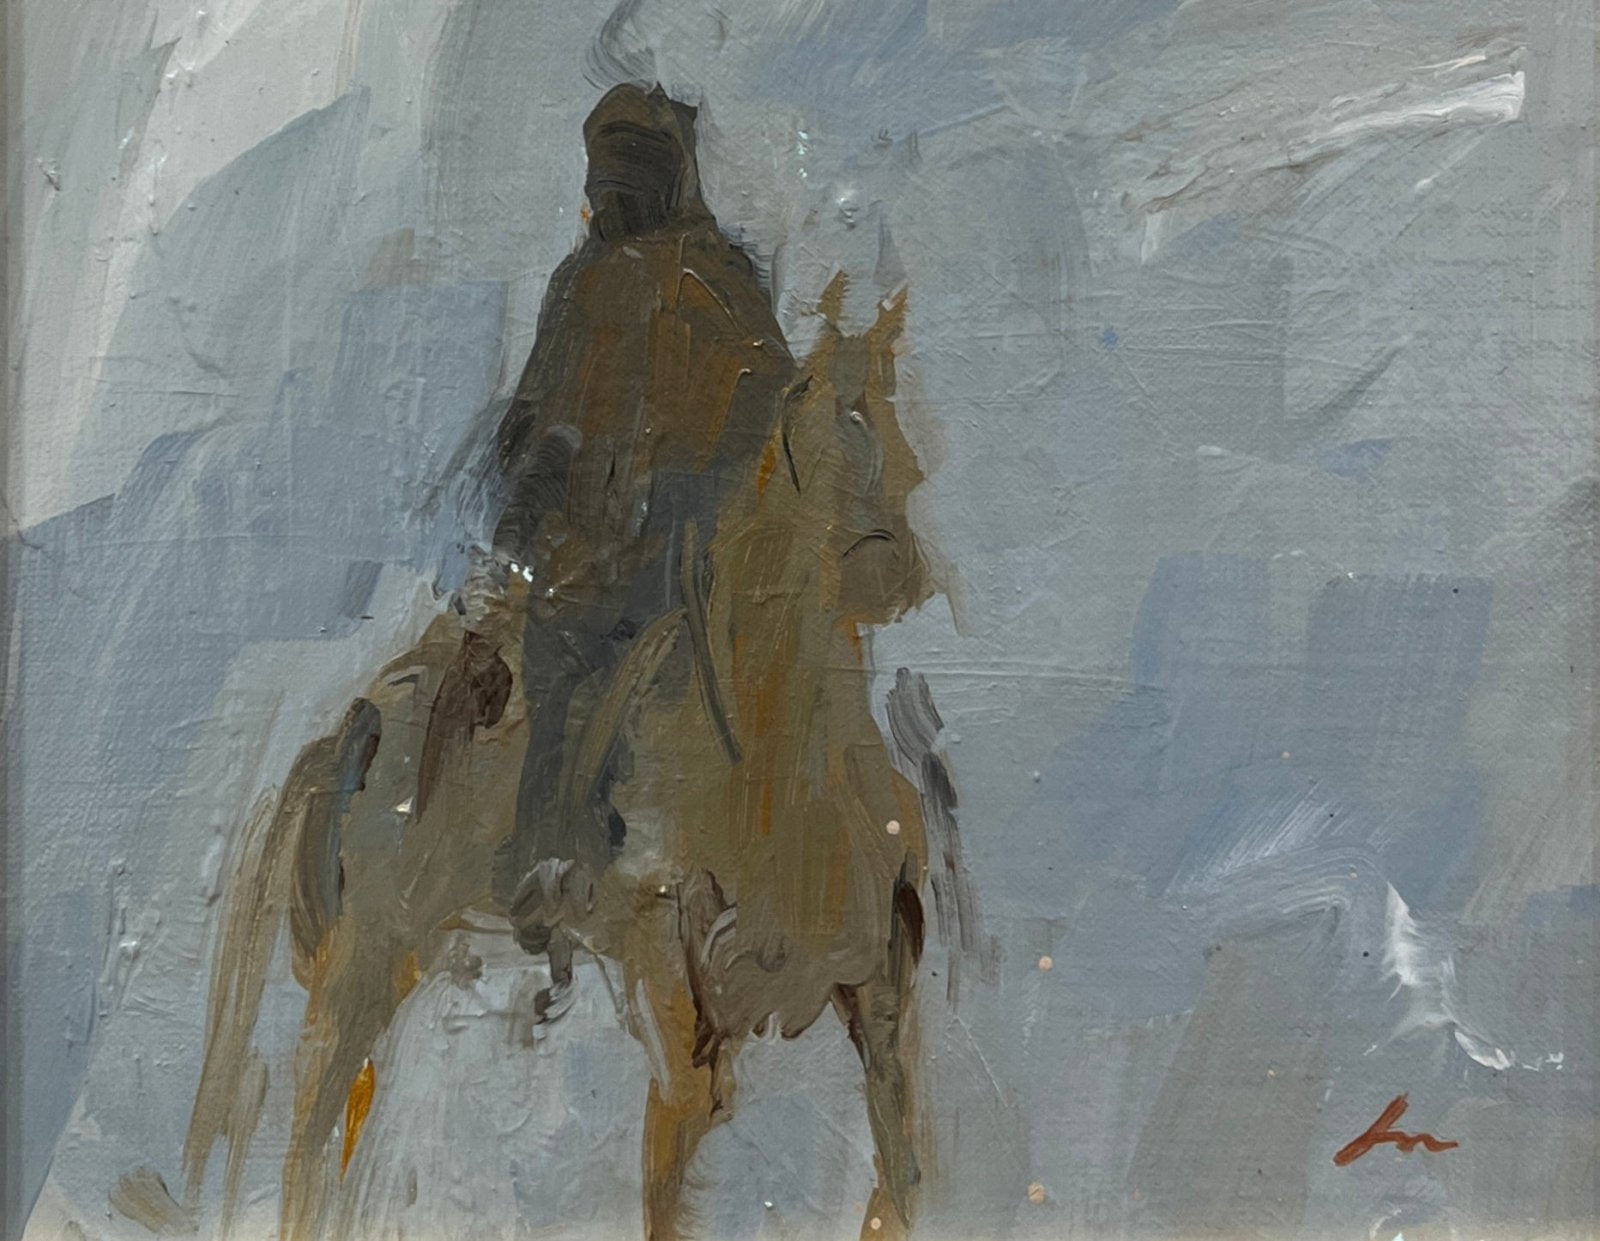 Horse and Rider by Deborah Hill at LePrince Galleries